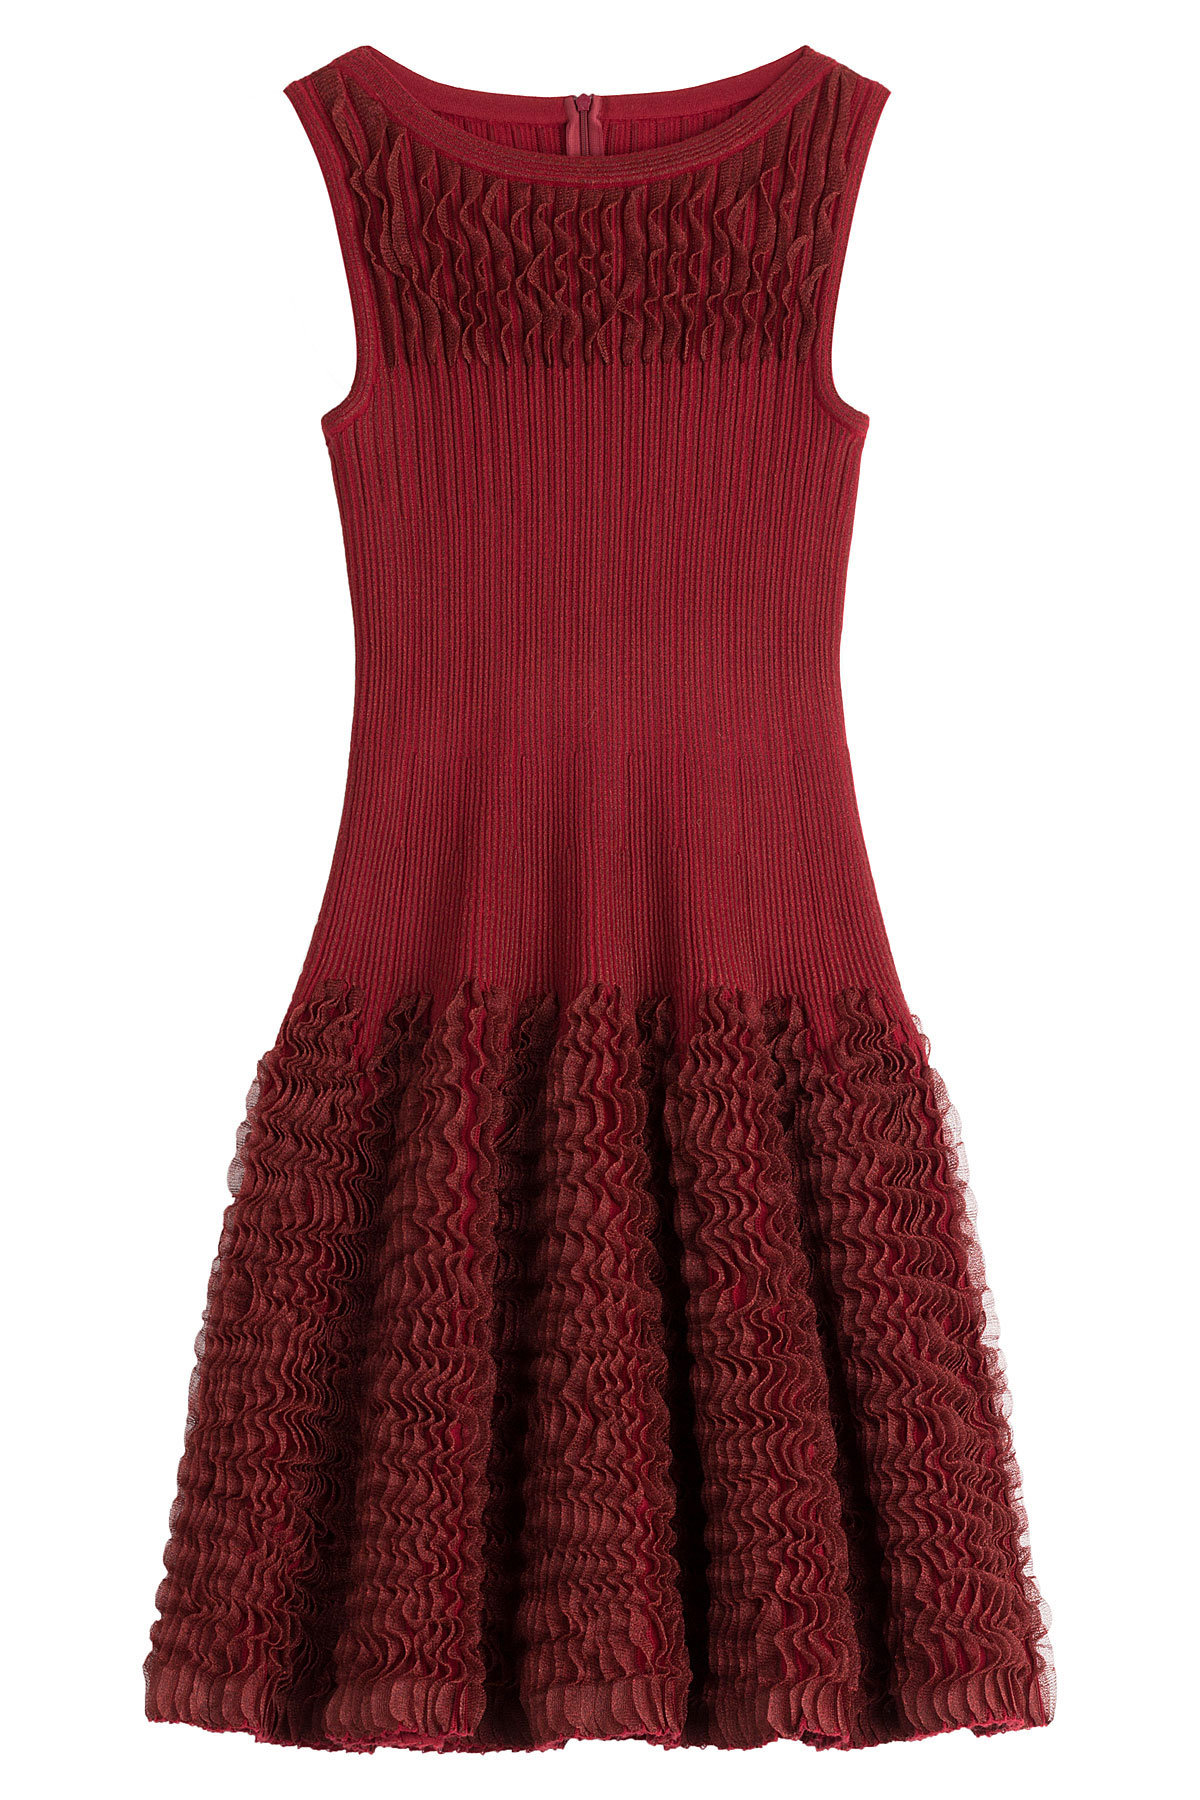 Alaia - Ruffled Knit Dress with Wool